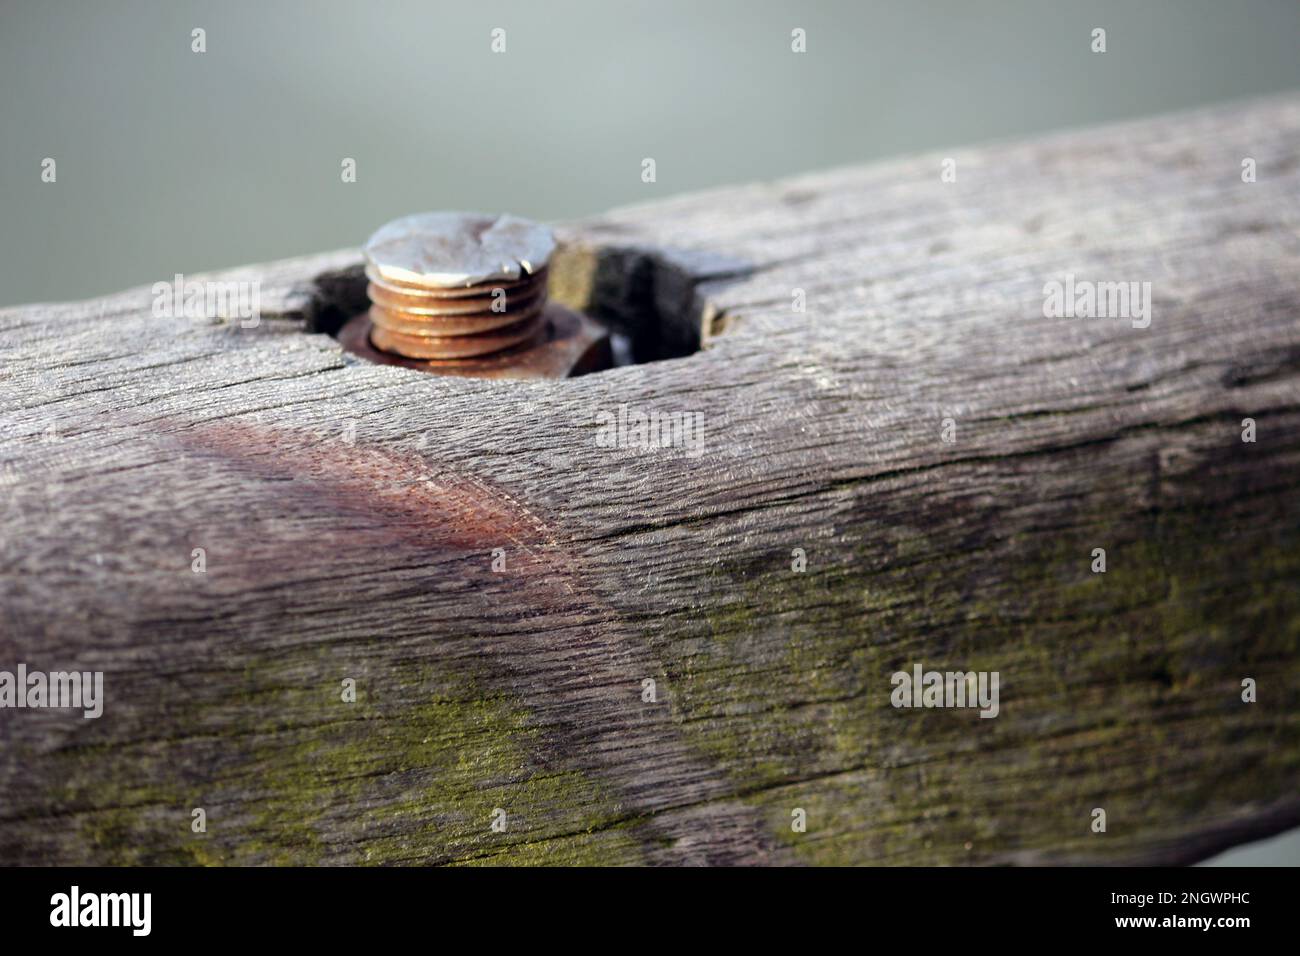 At the dock, time leaves marks on the wood. Ropes, nails and screws leave marks in the wood. Stock Photo